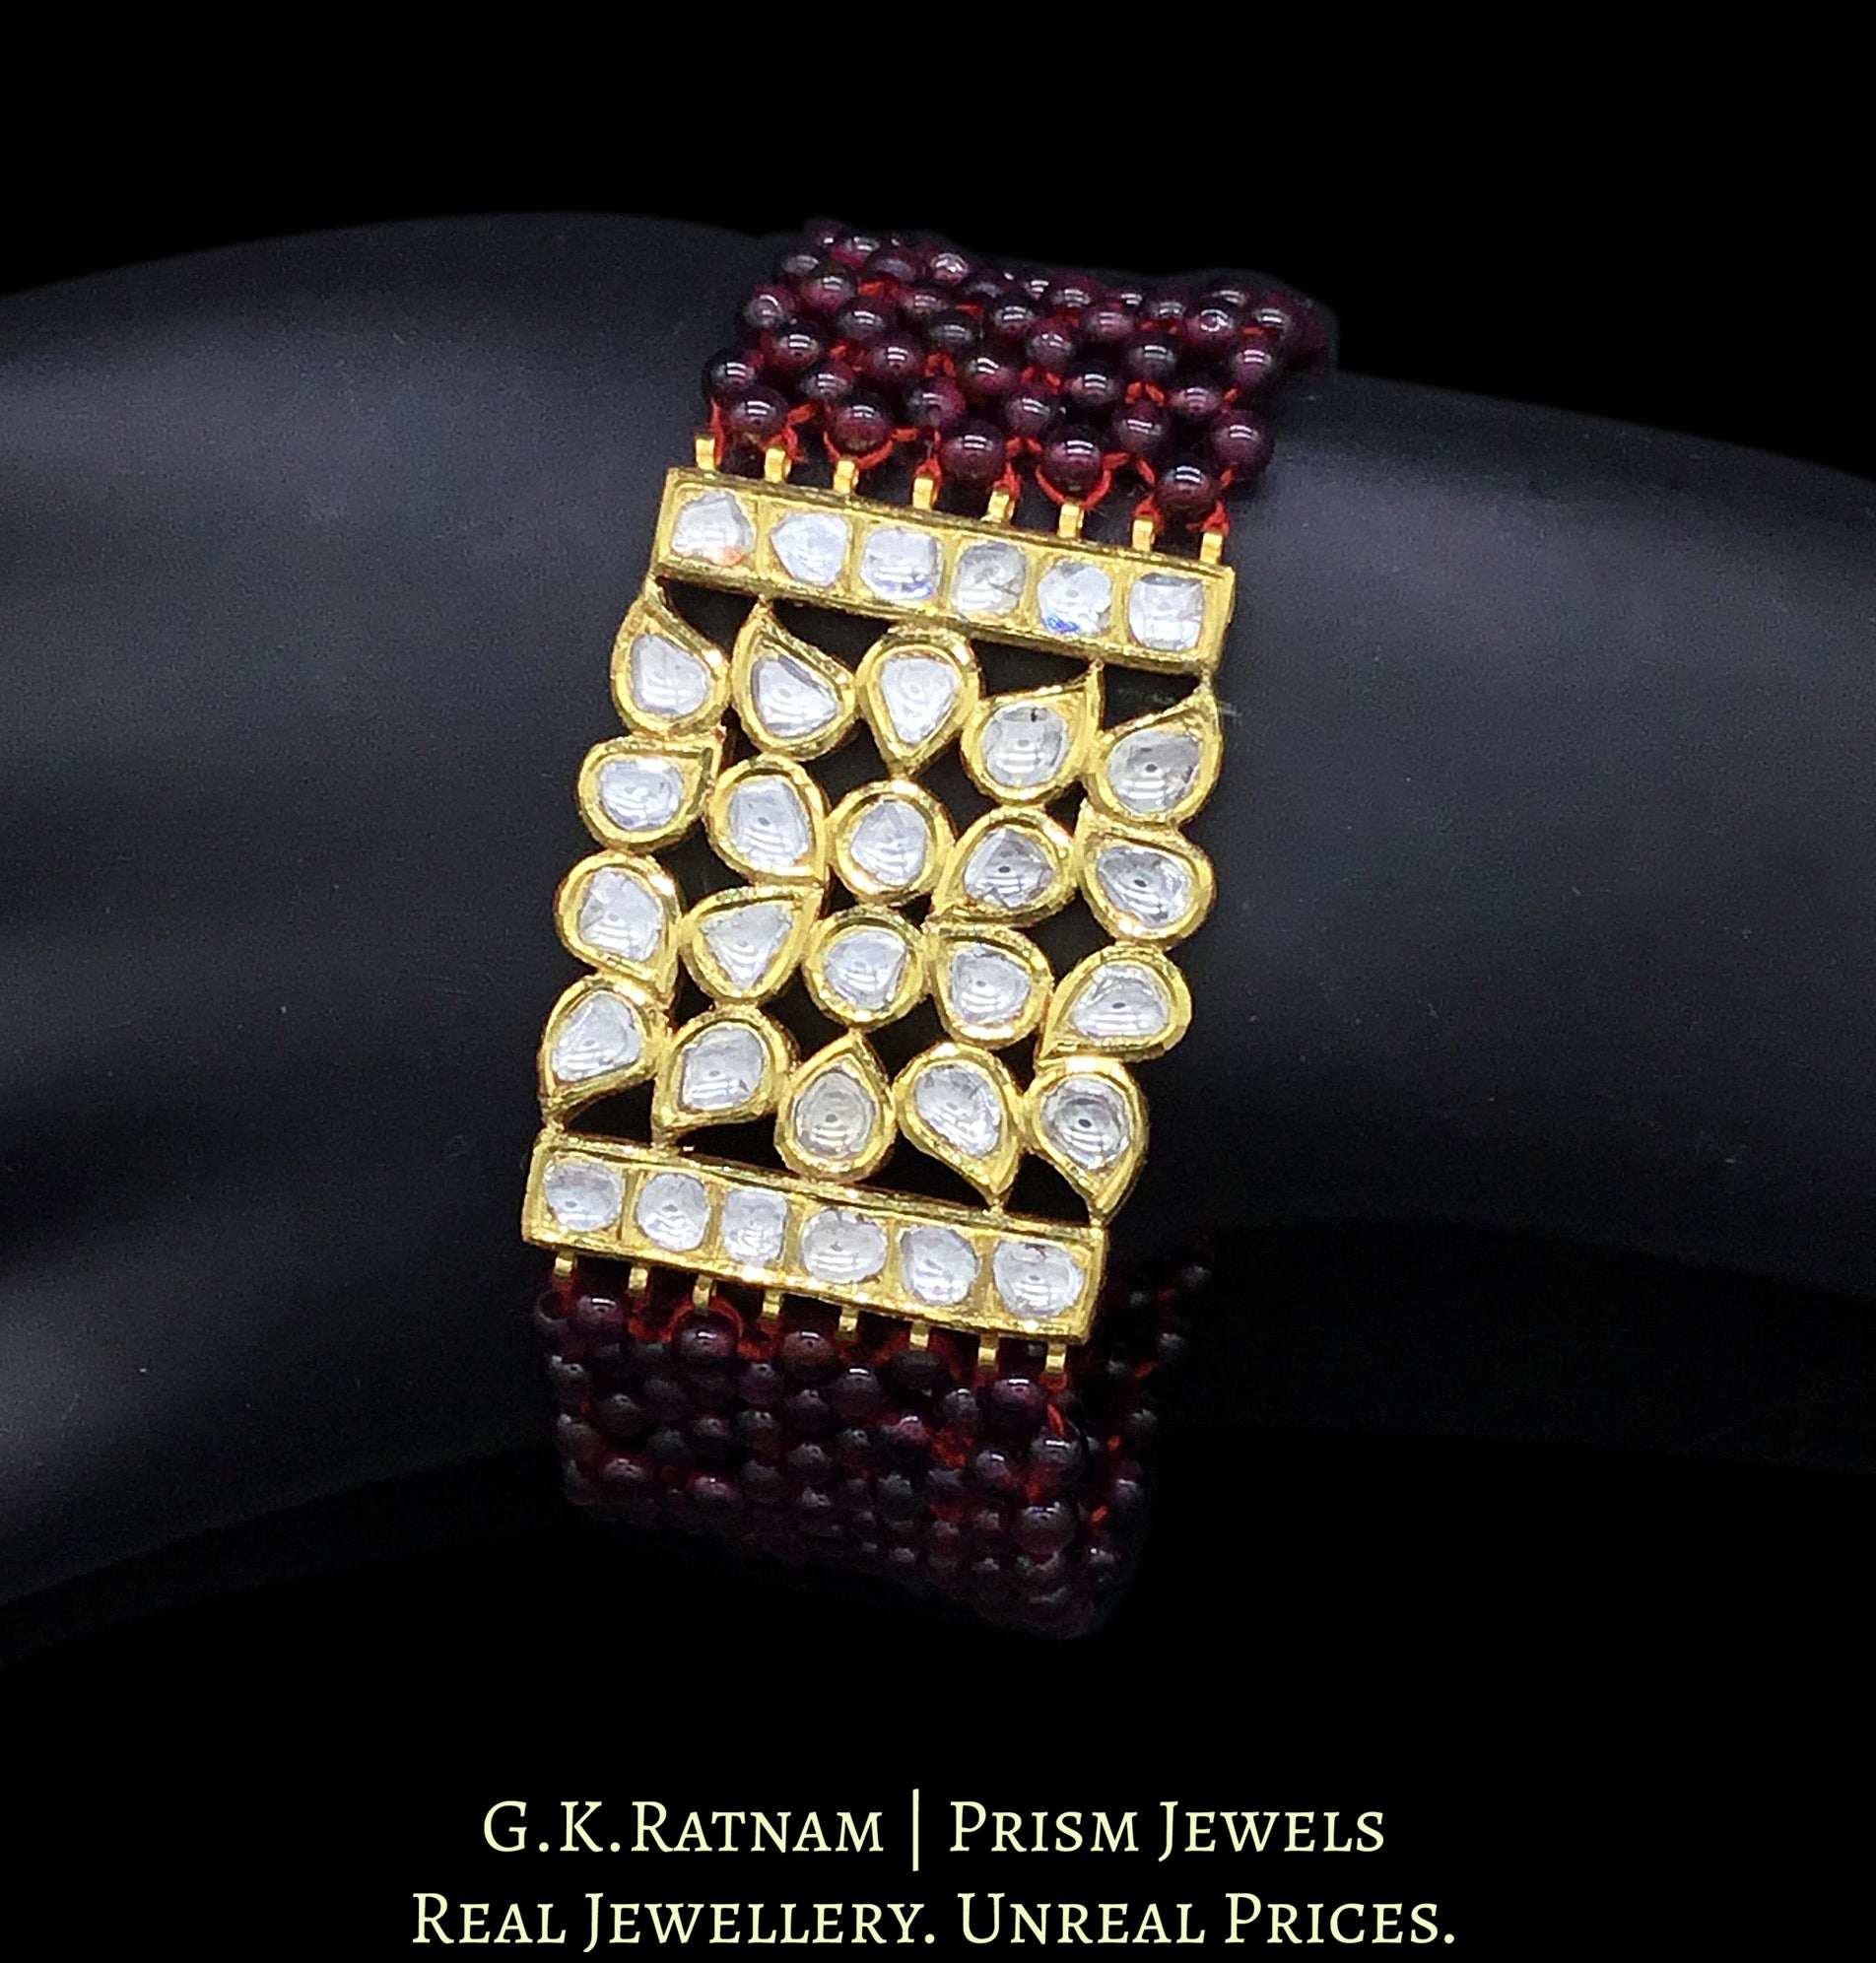 18k Gold and Diamond Polki Bracelet with ruby-red garnets strung like a Mat